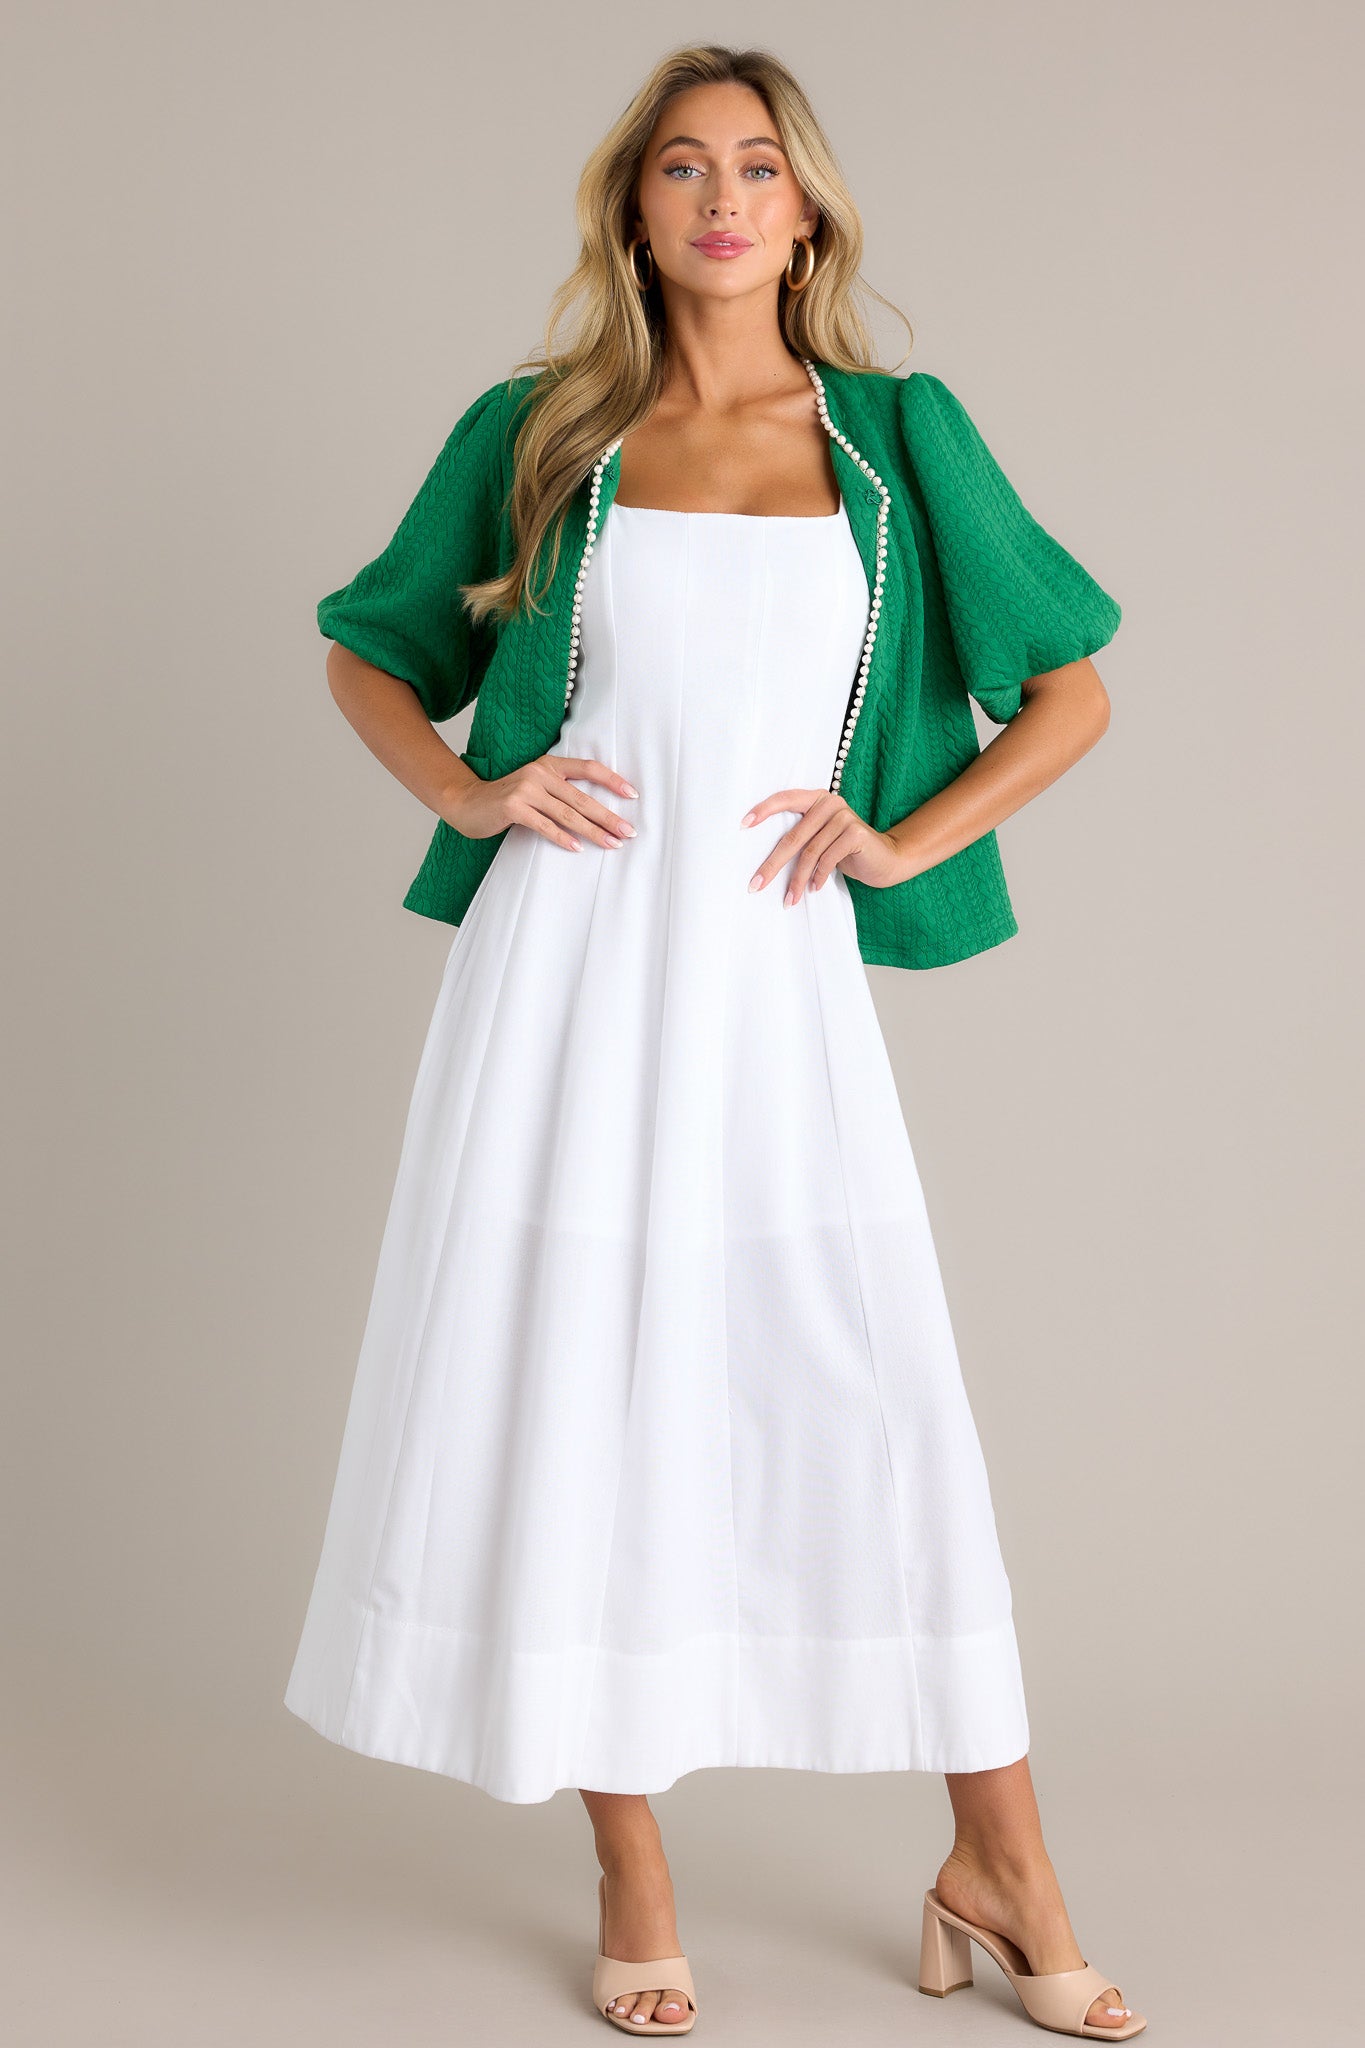 This white maxi dress features a square neckline, thick straps, a discrete back zipper, a flowing silhouette, and a thick hemline.